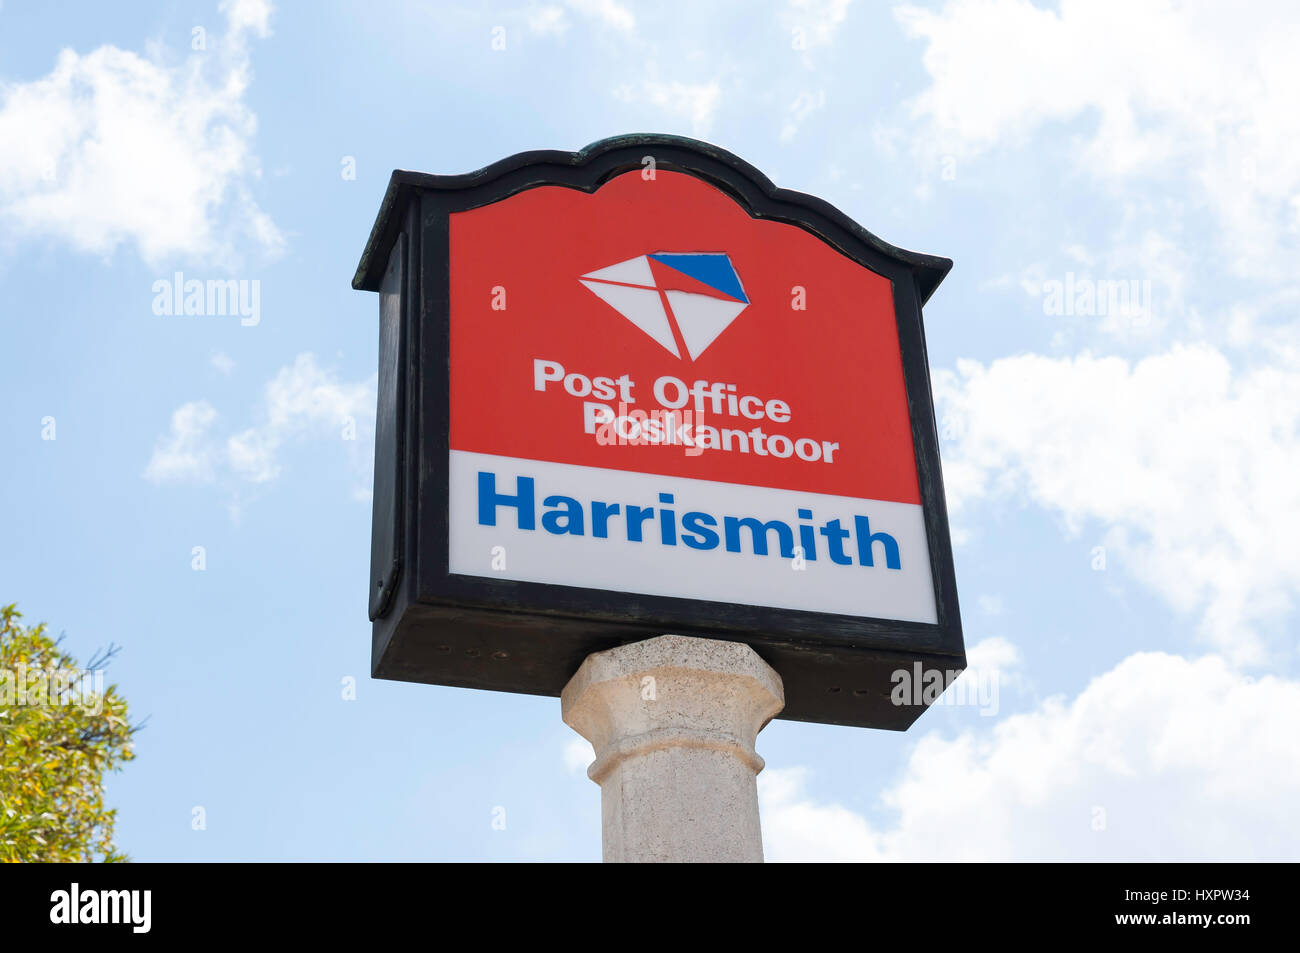 Harrison Post Office (Poskantoor) sign, Stuart Street, Harrismith, Free State Province, Republic of South Africa Stock Photo